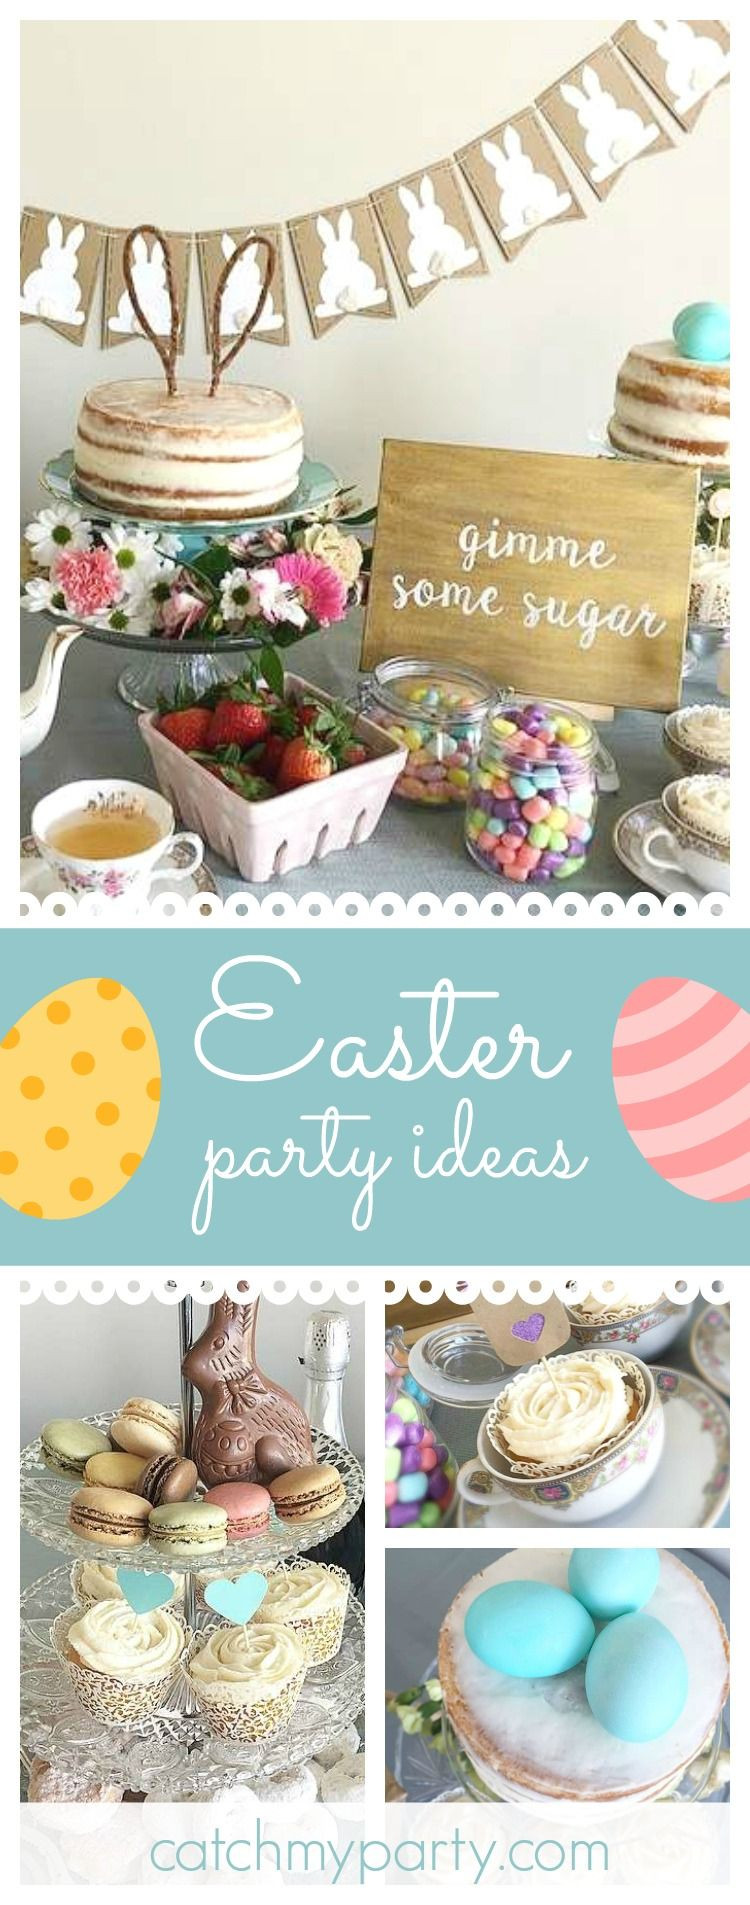 Easter Tea Party Ideas
 Take a look at this pretty Easter Tea Party The dessert